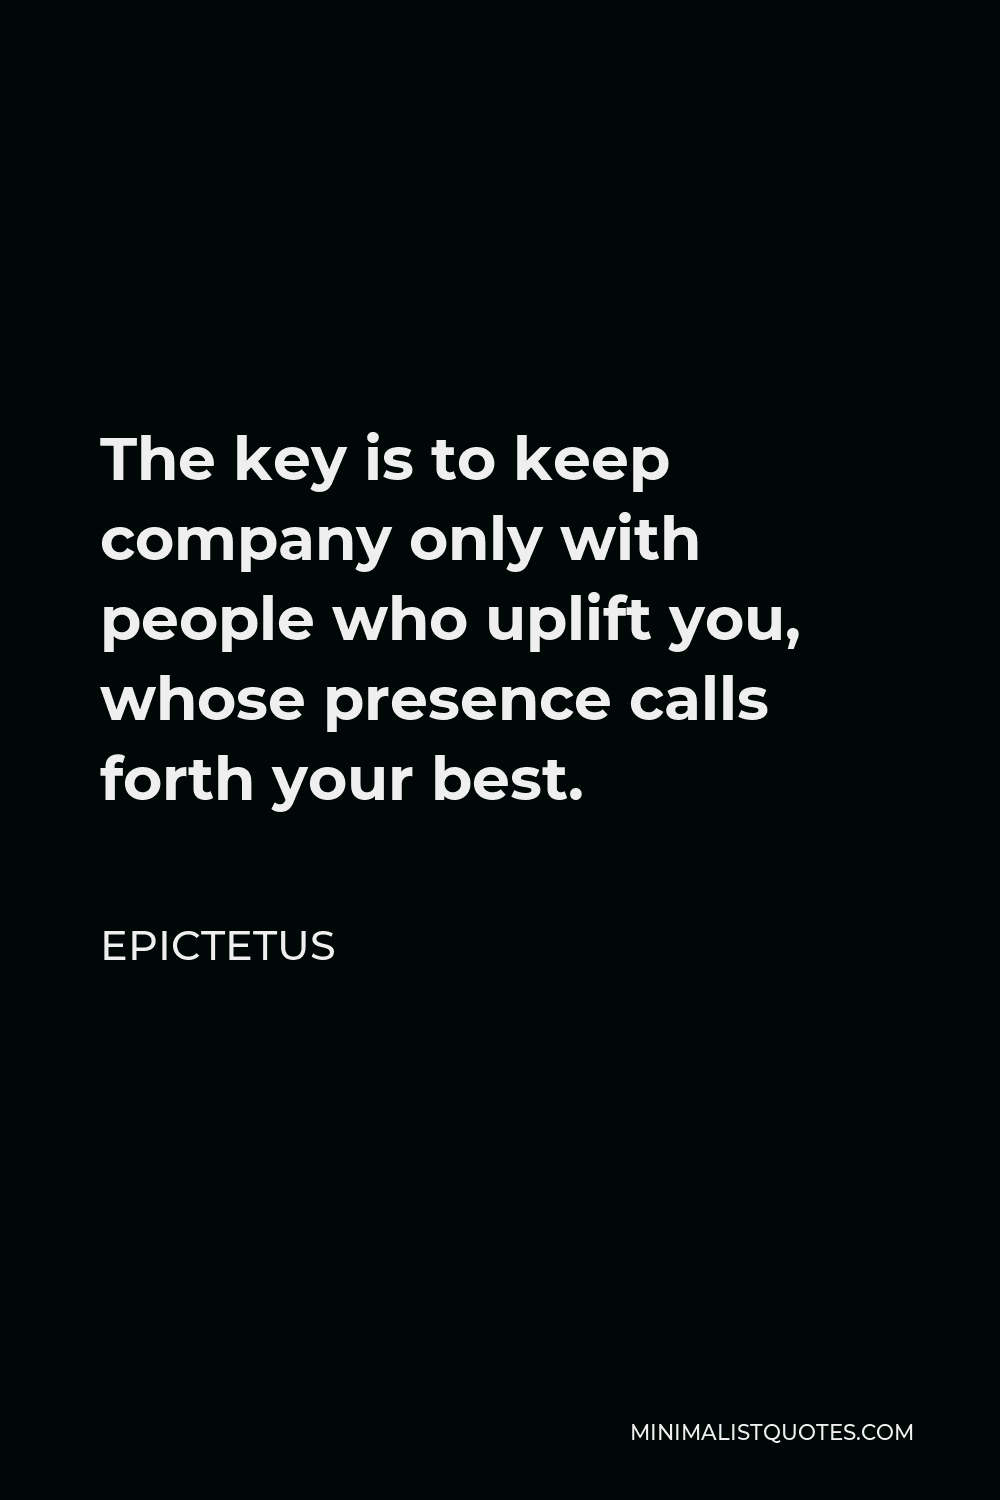 Epictetus Quote - The key is to keep company only with people who uplift you, whose presence calls forth your best.